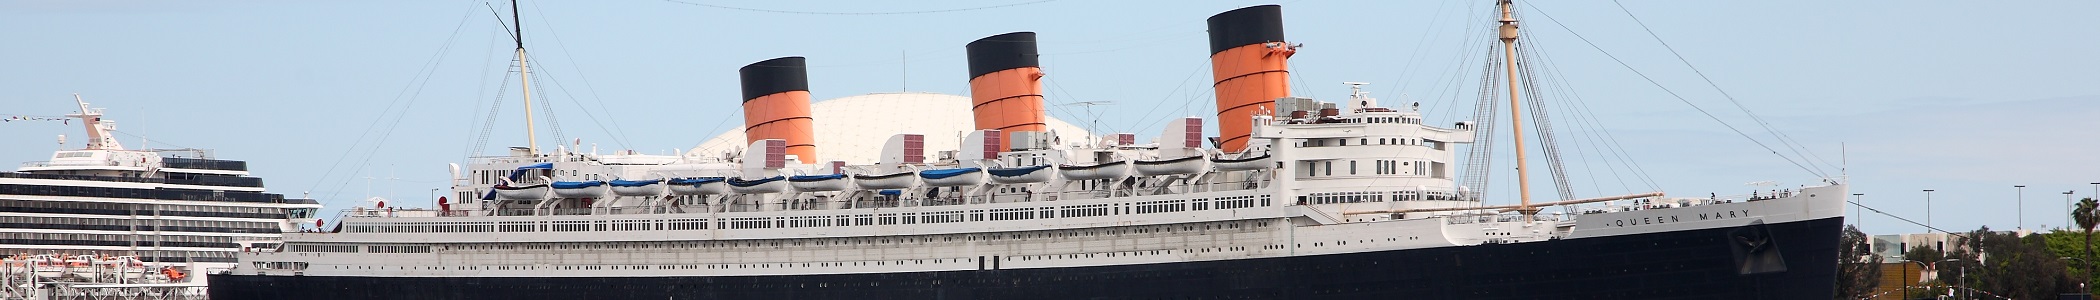 File:Rms_queen_mary_banner.jpg